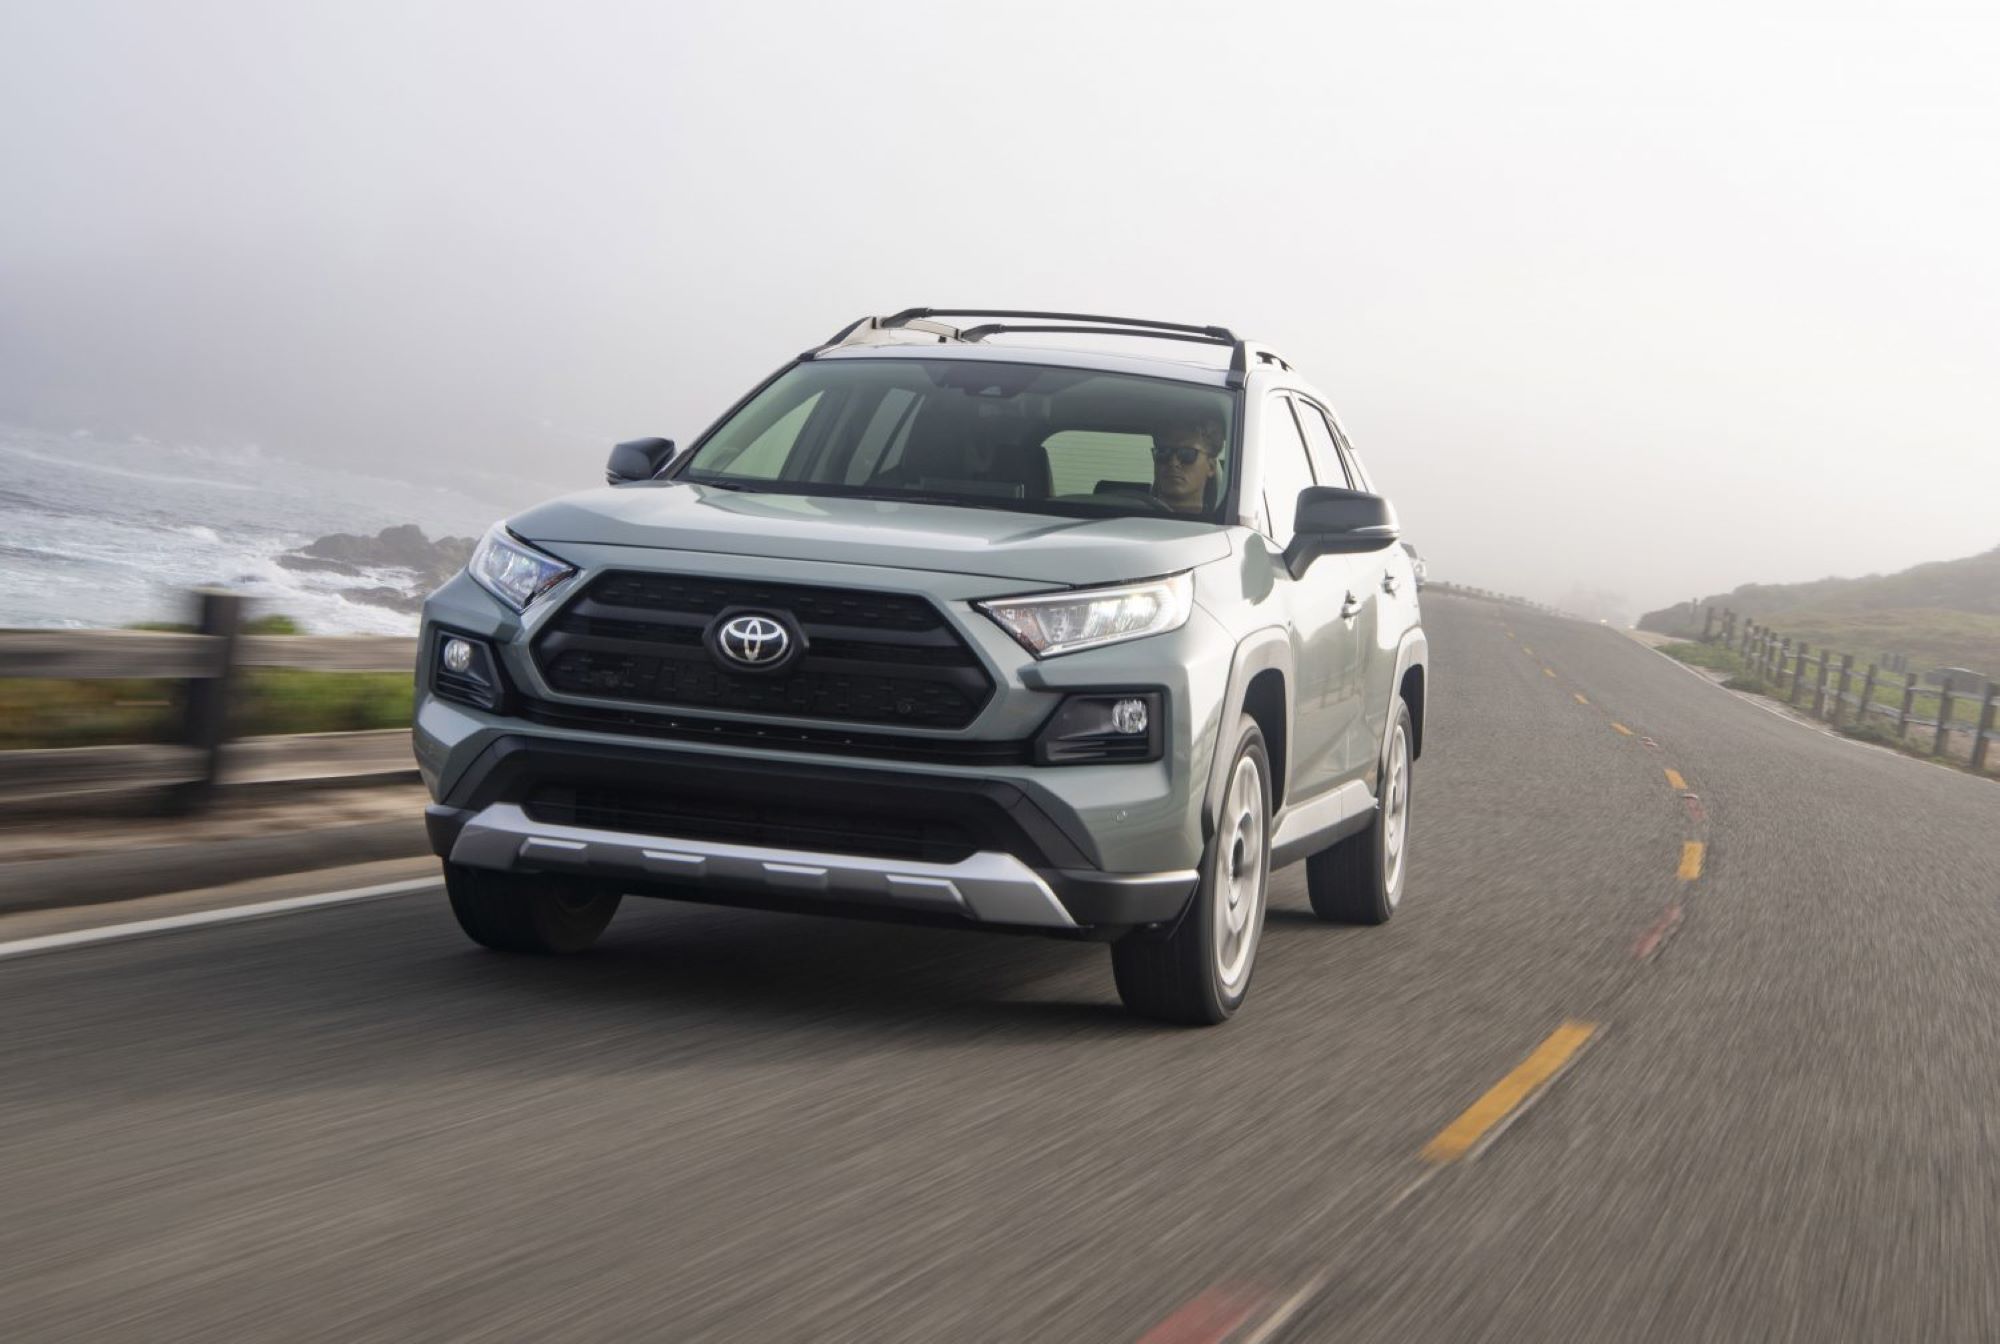 A silver 2021 Toyota RAV4 driving on a highway next to the ocean.